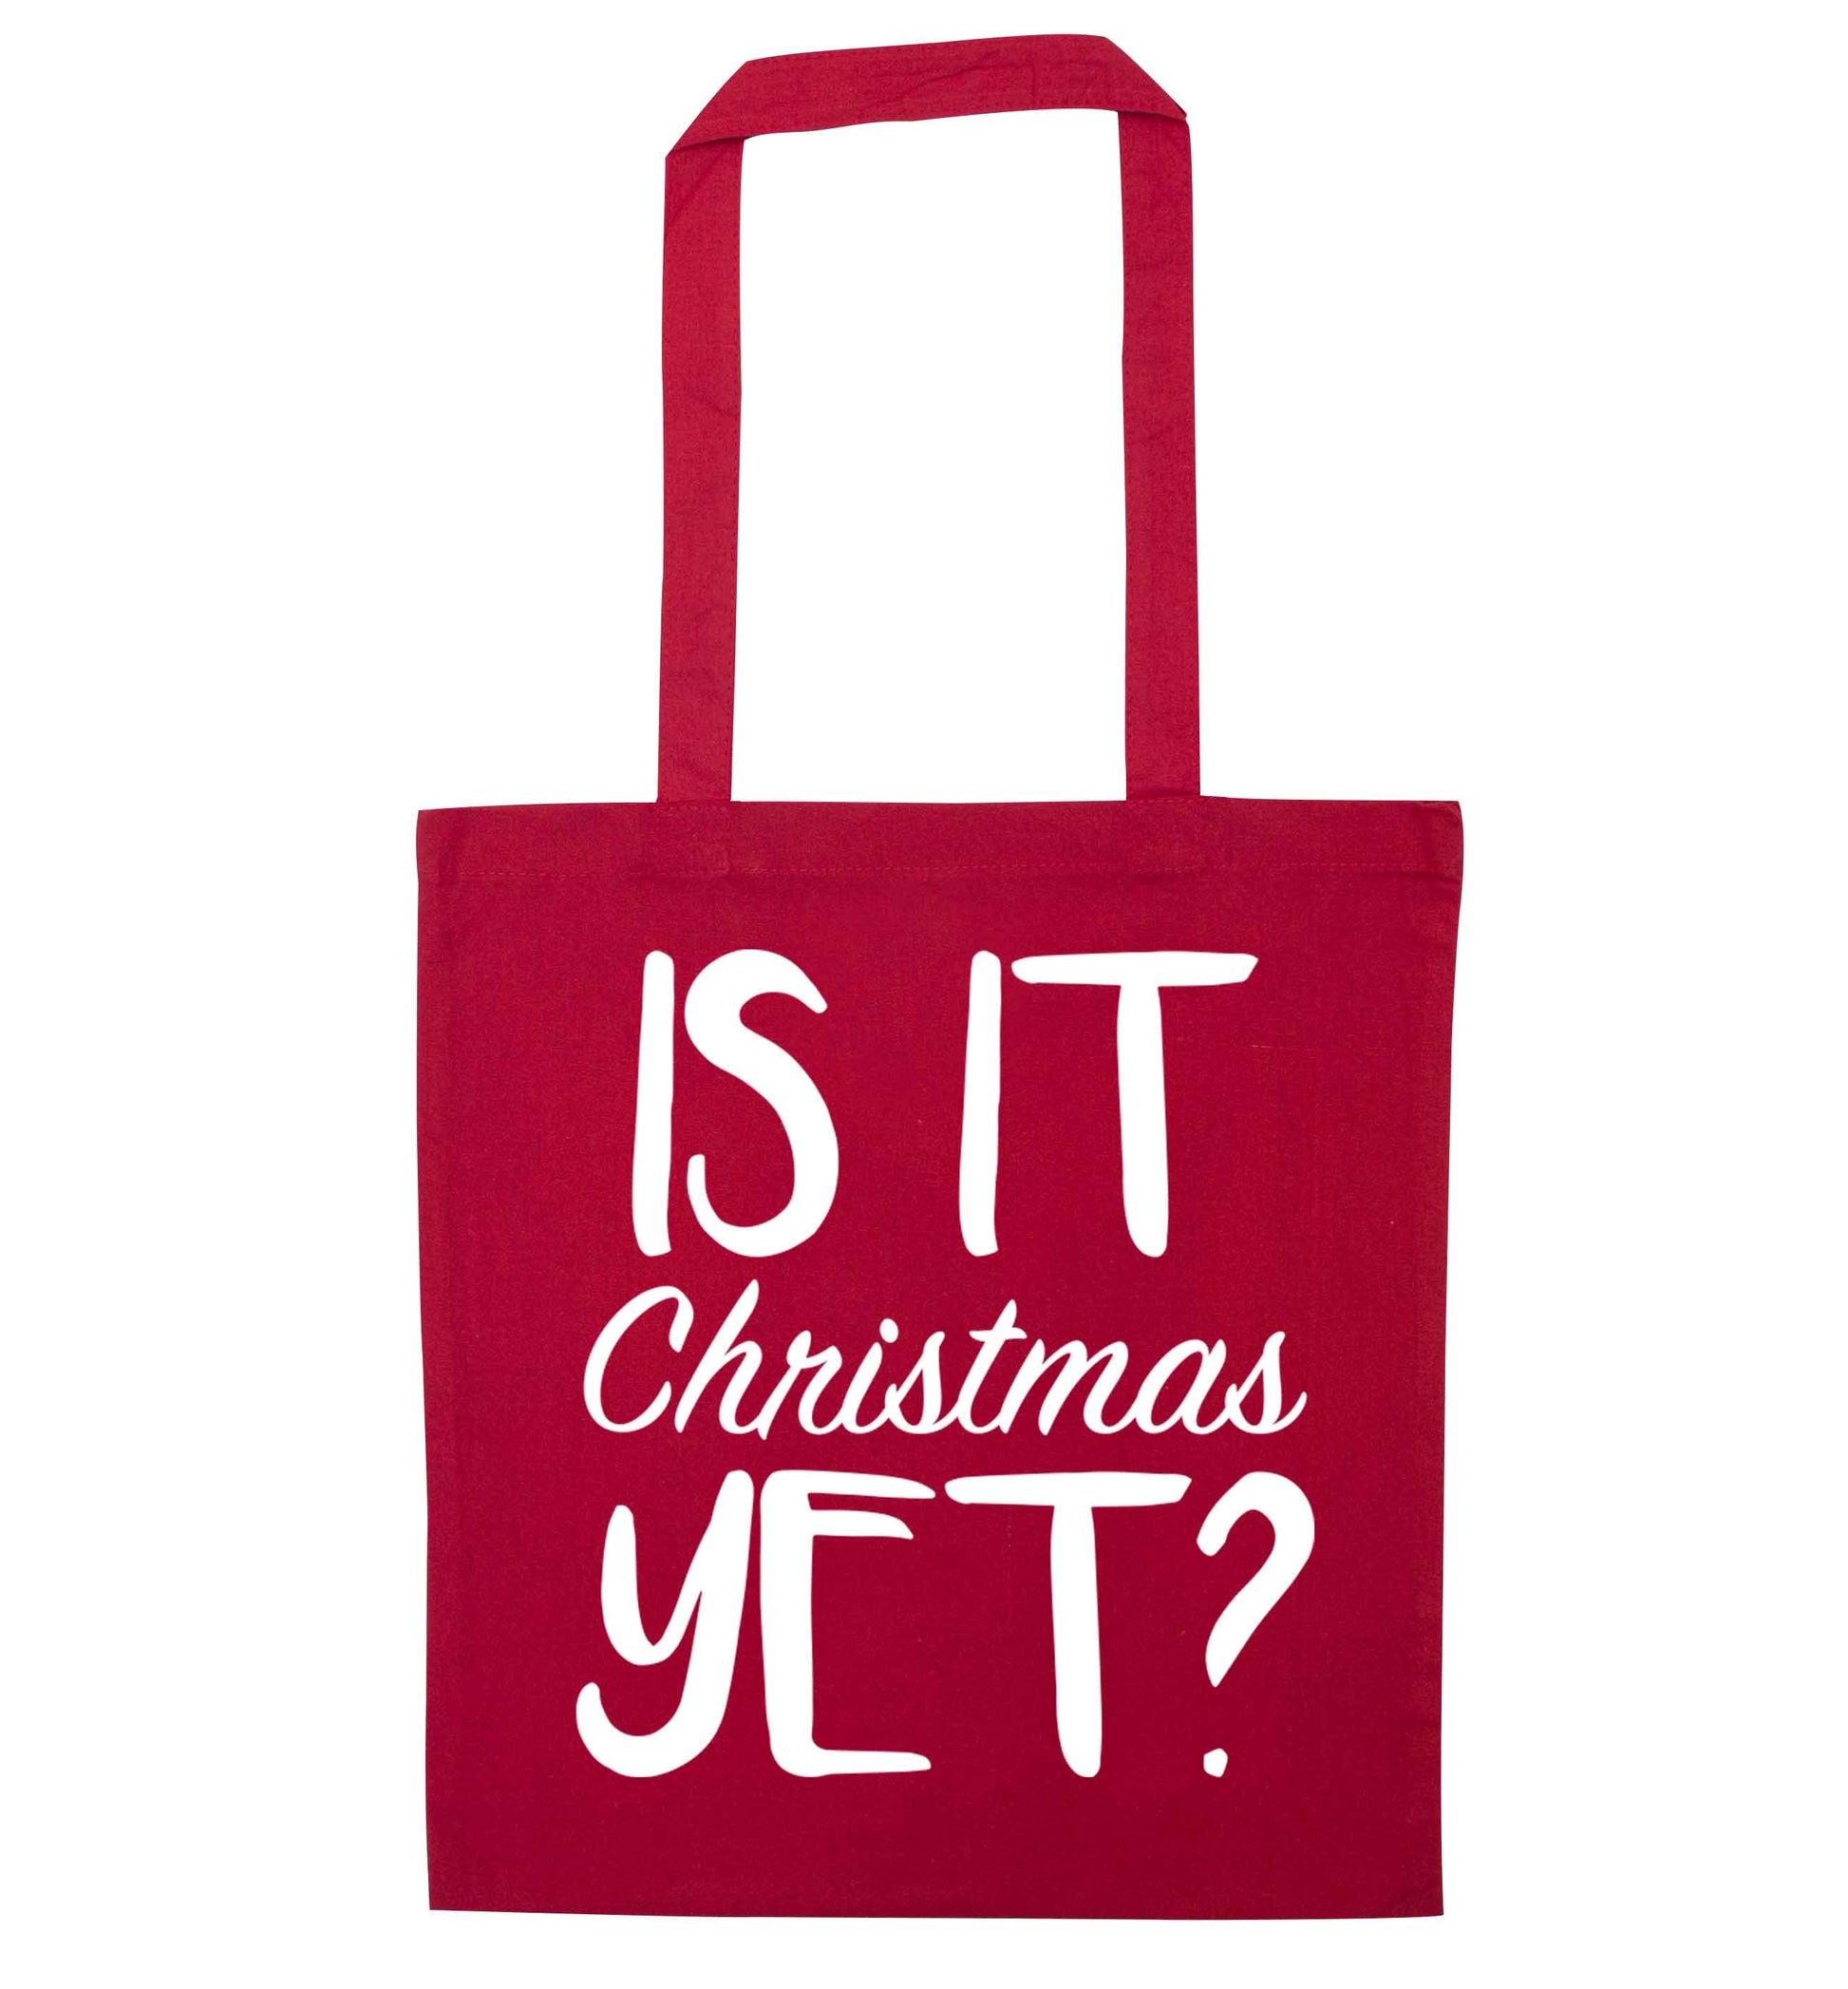 Is it Christmas yet? red tote bag